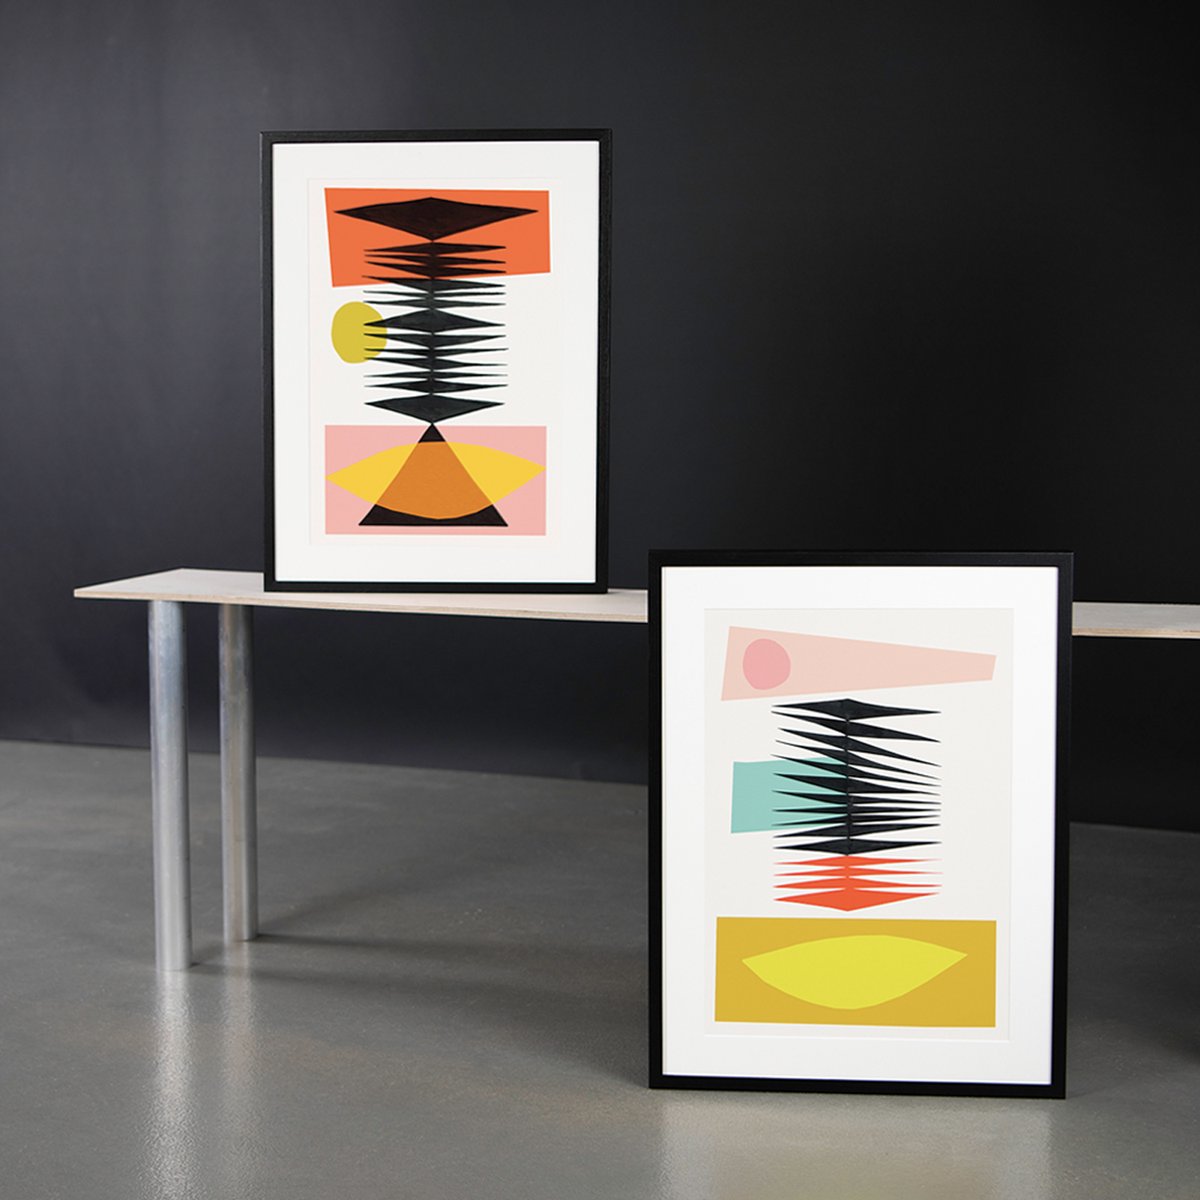 We’re excited to release the latest collection of fine art prints by our favourite Australian Art & Design studio, Inaluxe. A celebration of colour and shape, their abstract designs provide an uplifting repose, adept at brightening any interior. See more: kingandmcgaw.com/prints/inaluxe…